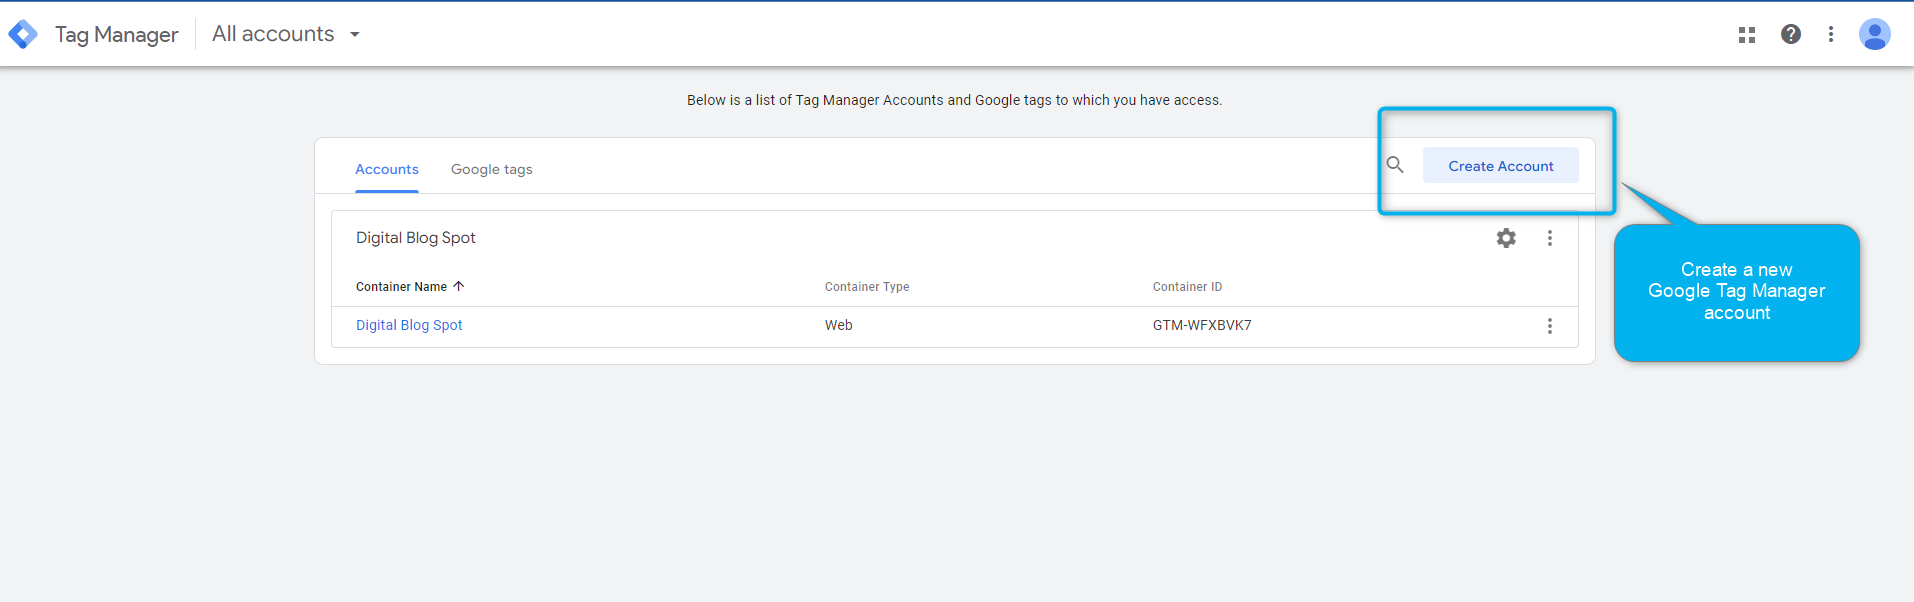 Create a new Google Tag Manager Account